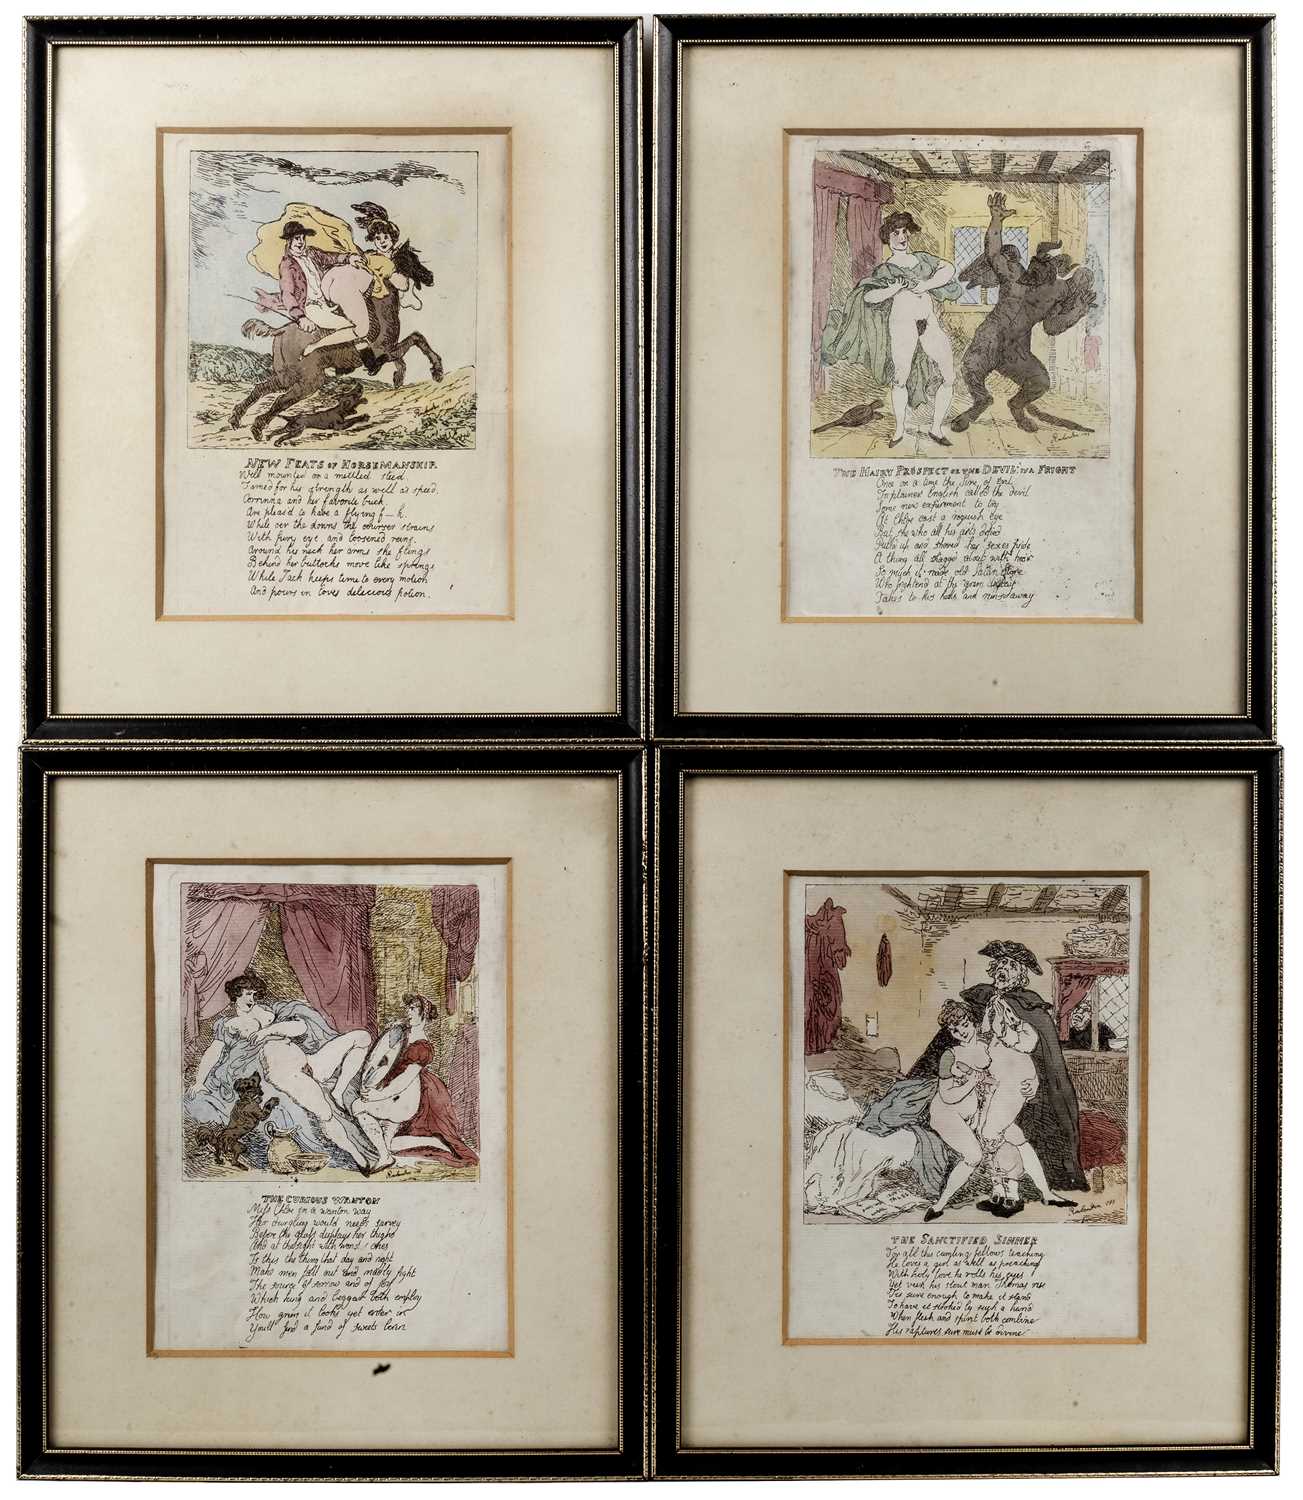 After Thomas Rowlandson (1756-1827) The Sanctified Sinner, and three further erotic scenes: The - Image 2 of 3